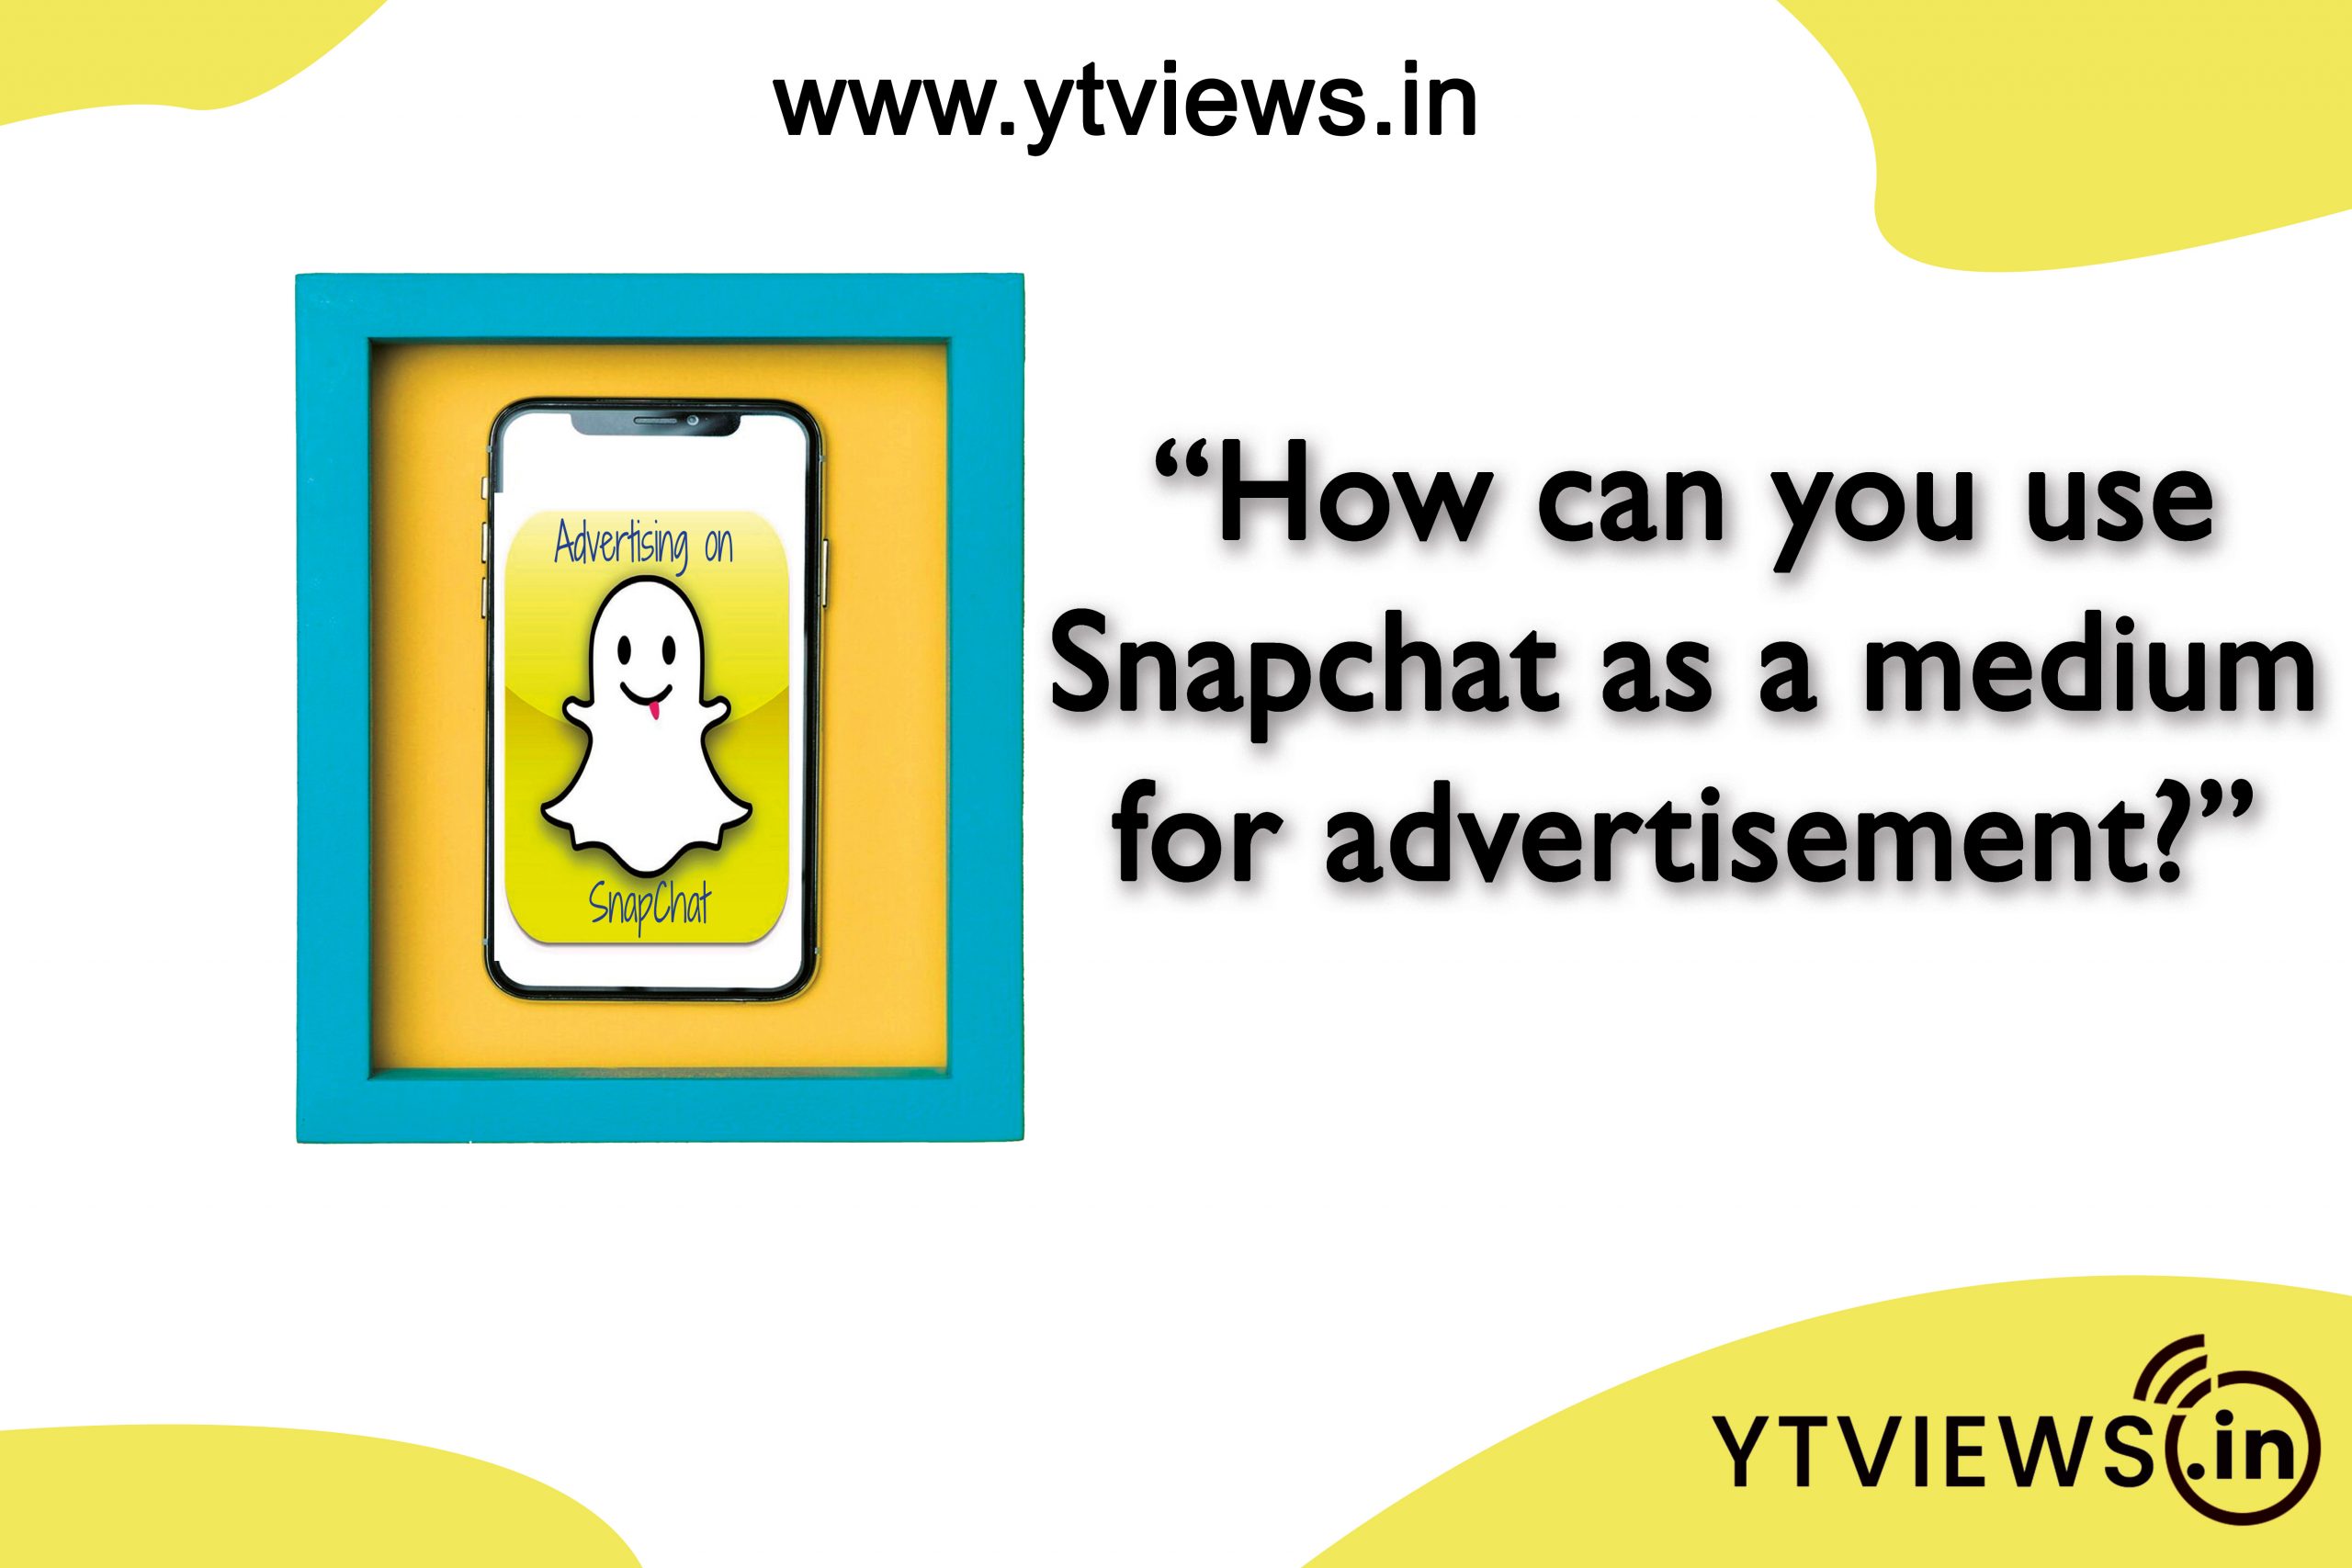 How can you use Snapchat as a medium for advertisement?